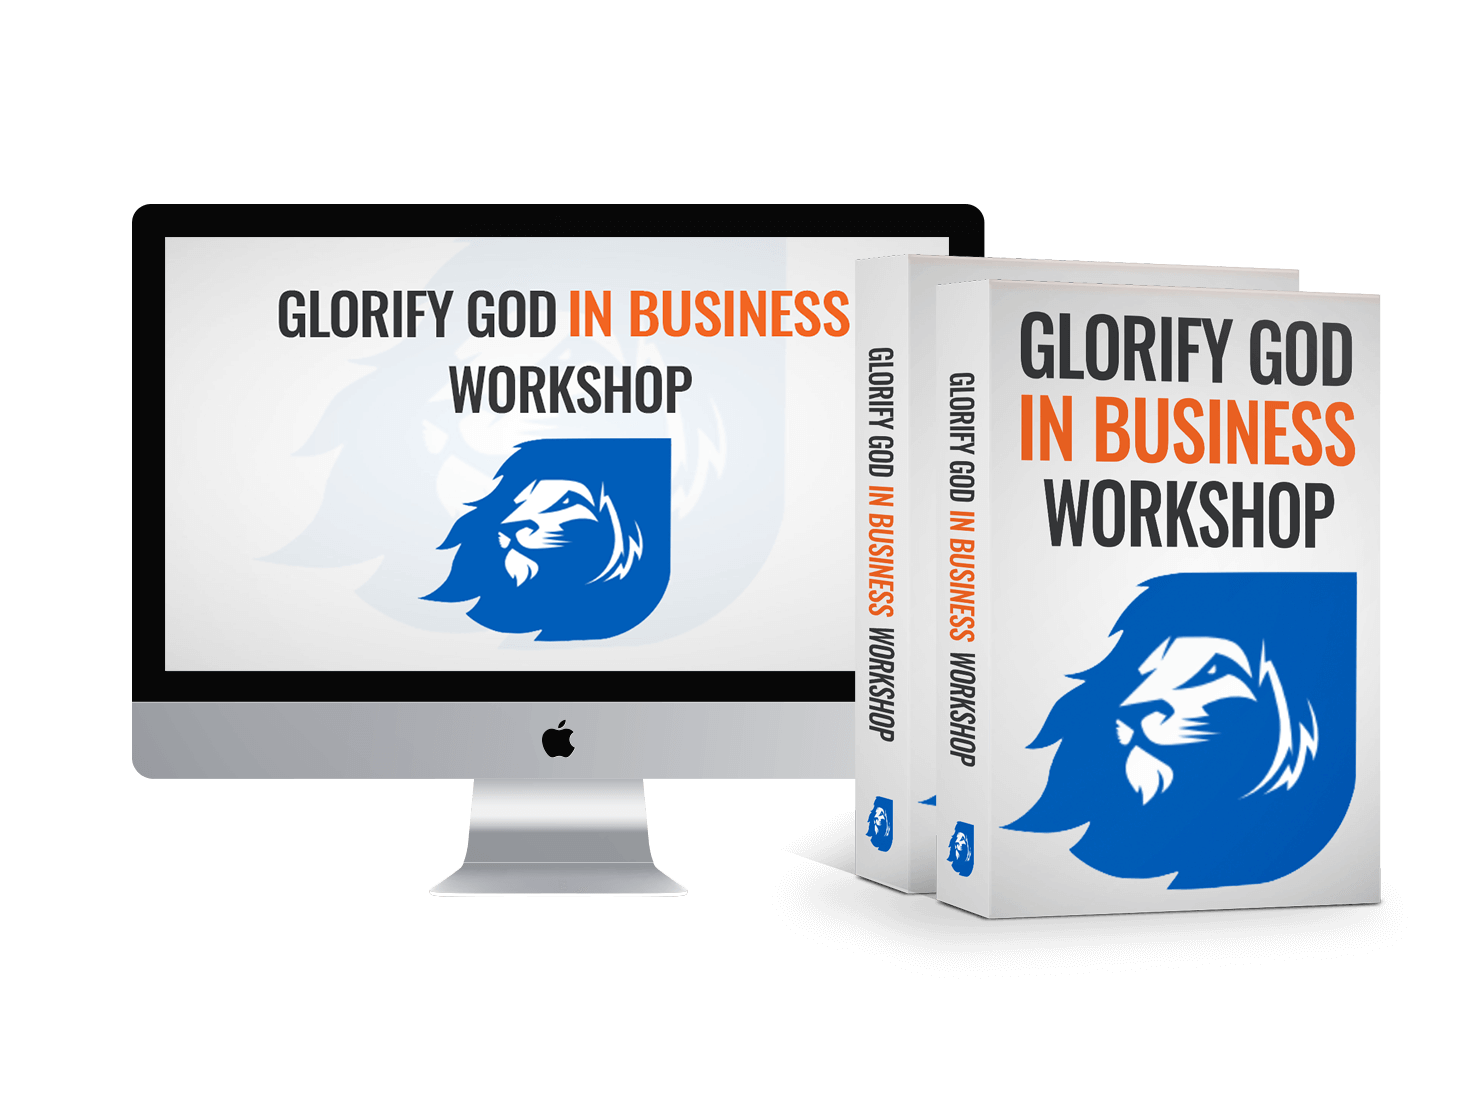 How to Make More Sales and Convert More Prospects While Glorifying God In Business – Daily Godpreneur with Alex Miranda